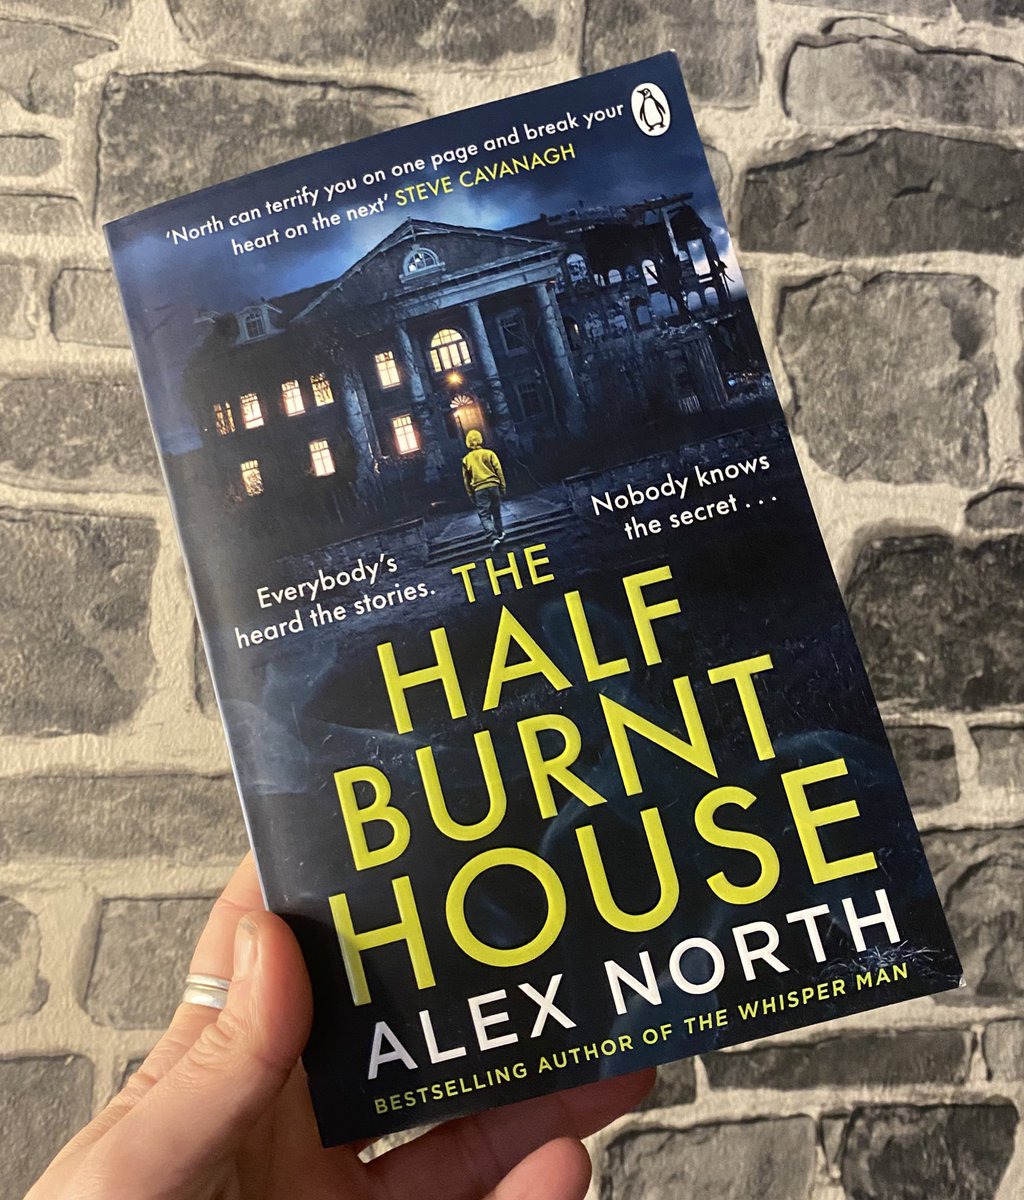 #Giveaway … I have an extra copy of #TheHalfBurntHouse by @writer_north To be in with a chance of winning 📚 follow me 📚 RT 📚 tag a pal Winner to be chosen on Wednesday #BookTwitter #booklover #booktwt #thrillerbooks #readingcommunity